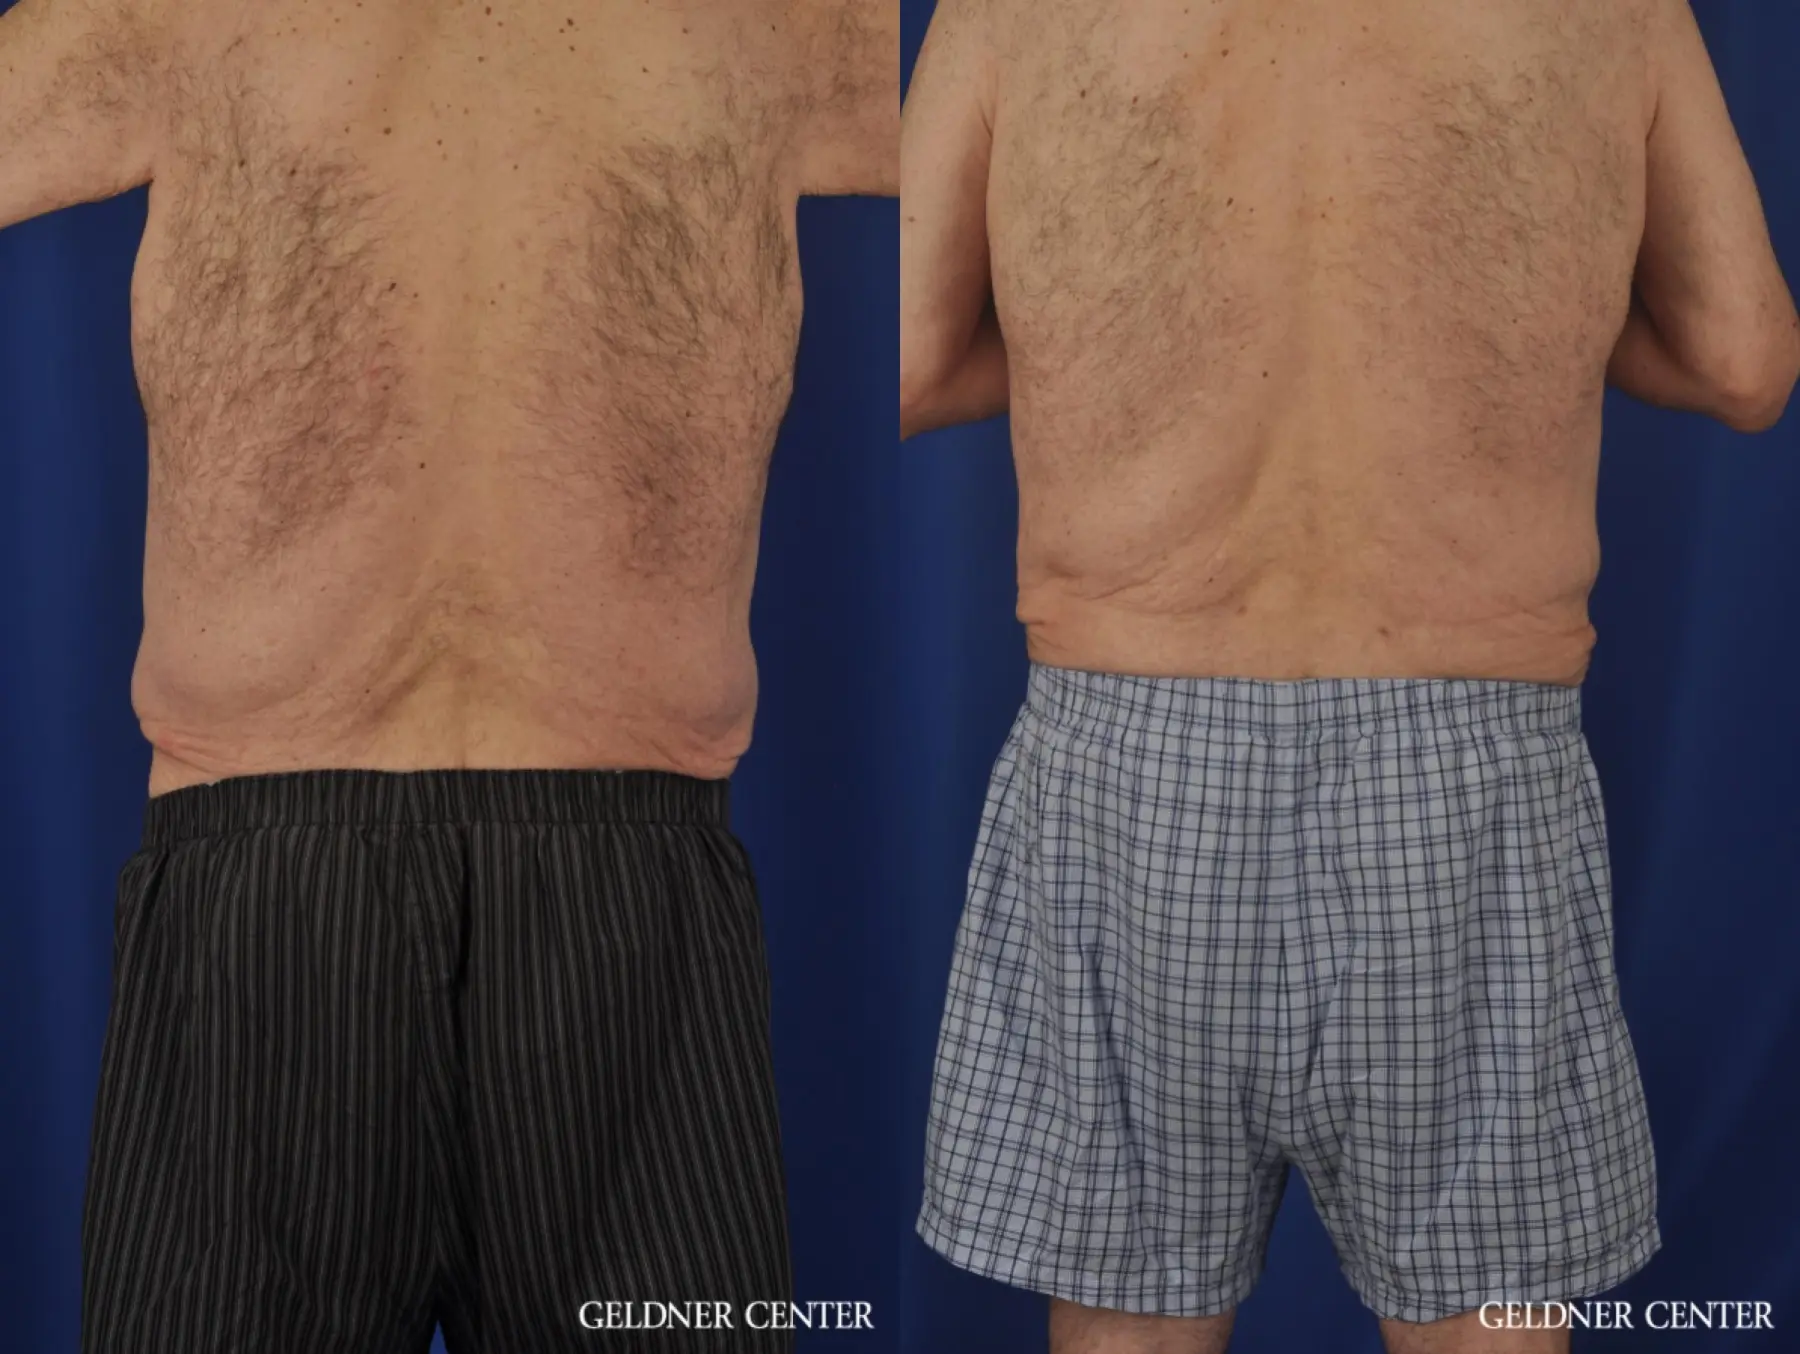 Abdominoplasty For Men: Patient 3 - Before and After 4